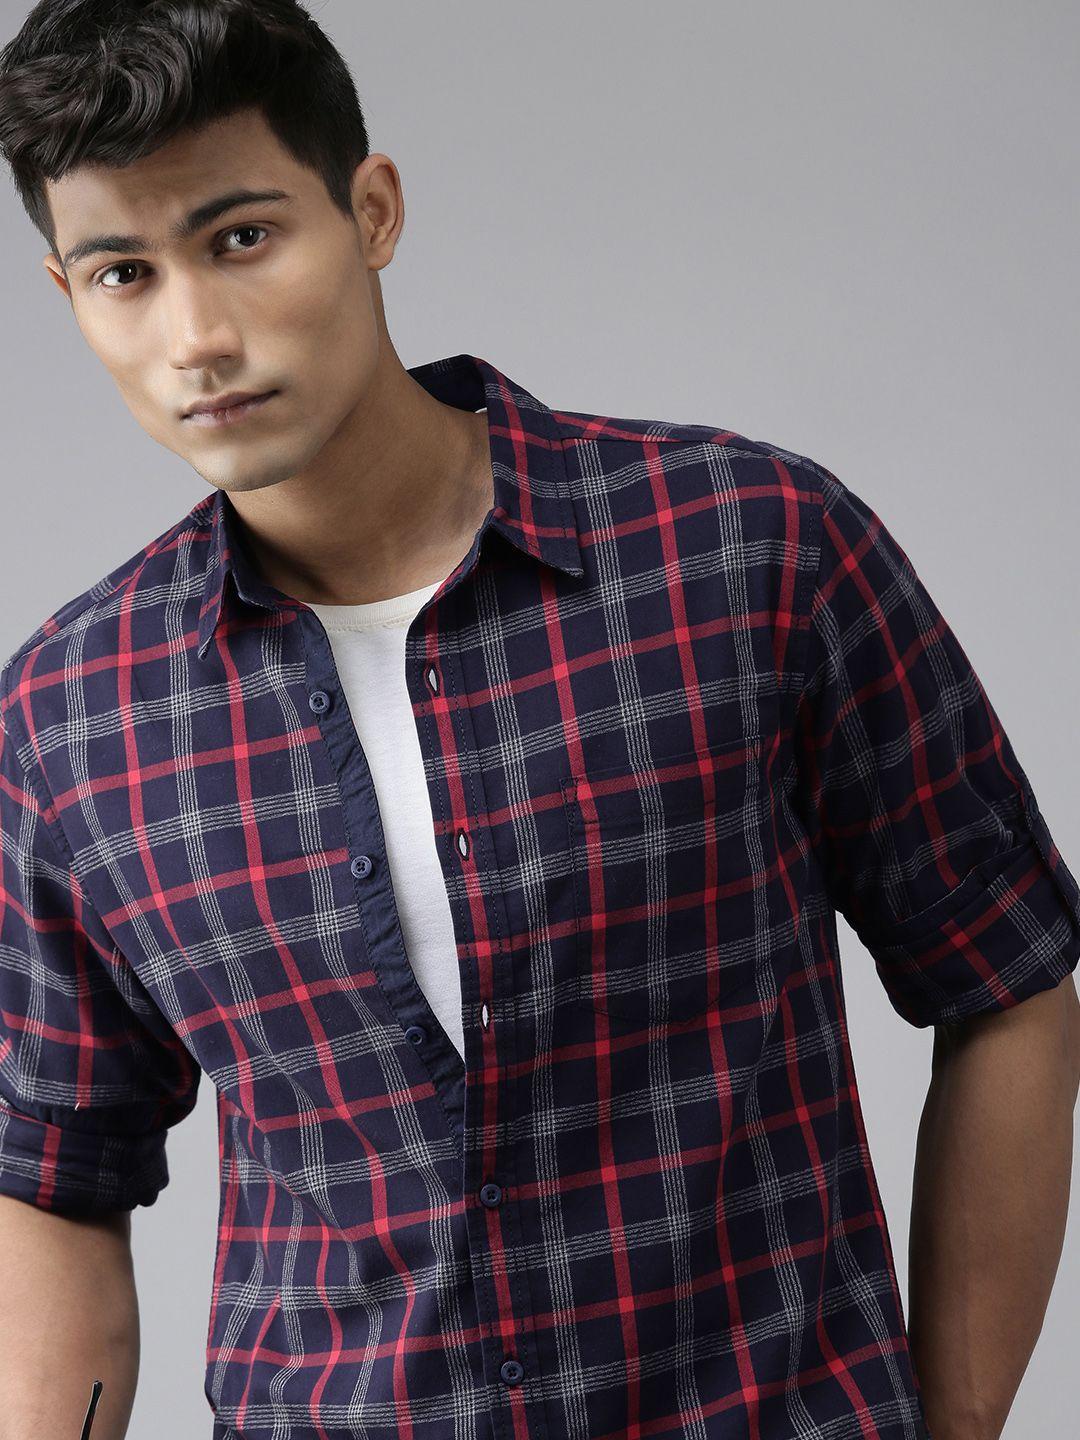 roadster men navy blue and red tartan checked regular fit pure cotton sustainable casual shirt